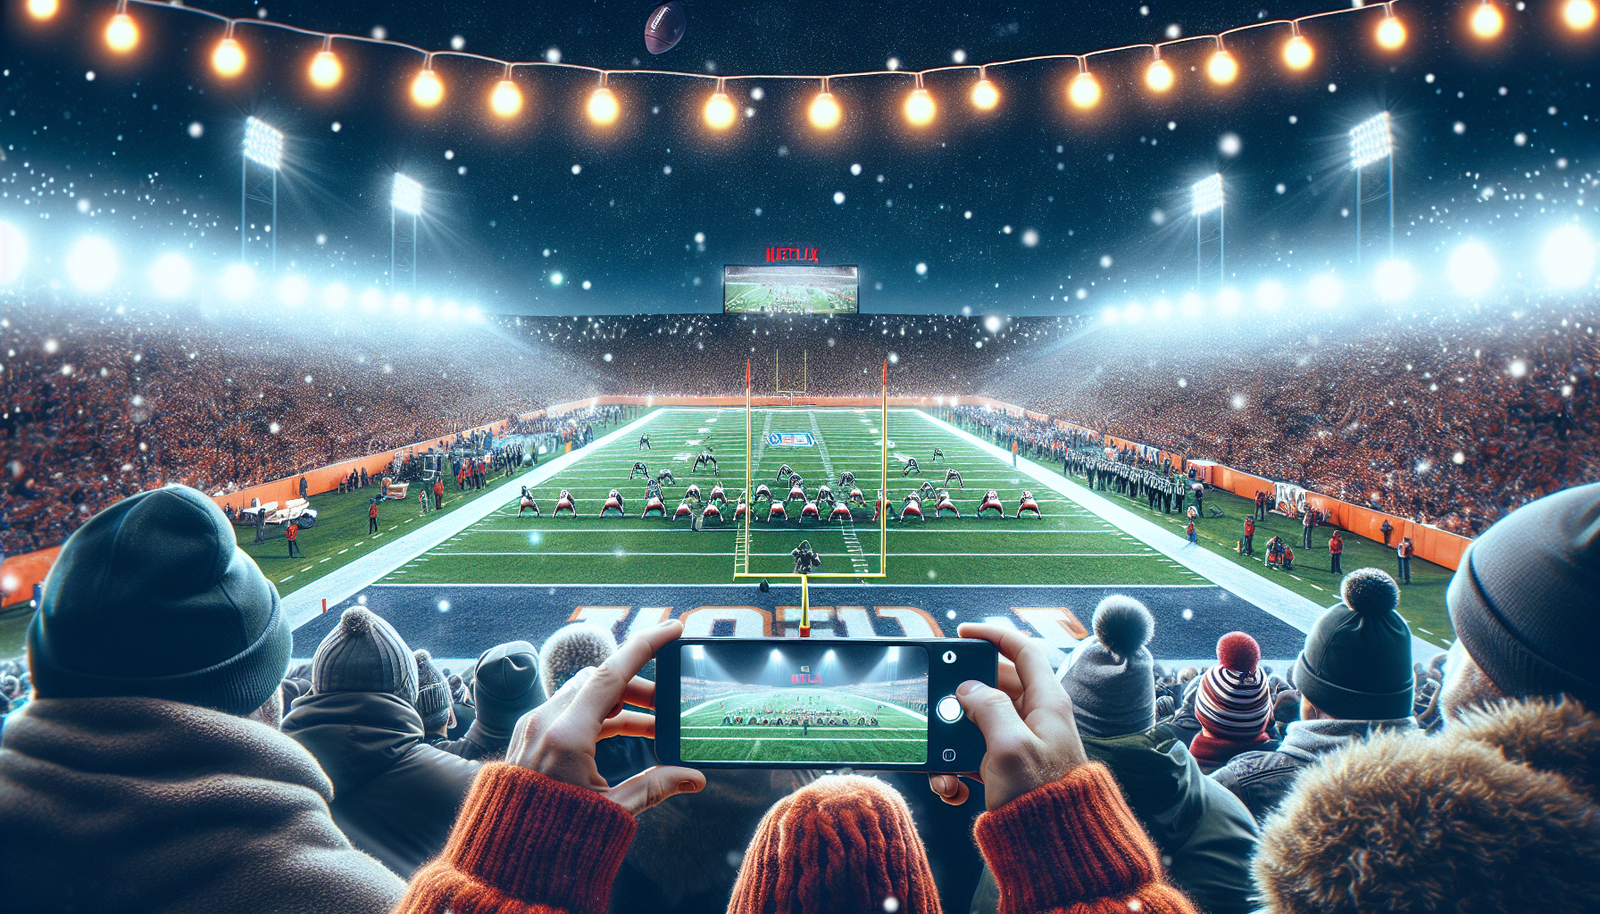 discover whether netflix could become the unexpected destination for nfl's christmas day games in this thought-provoking article.